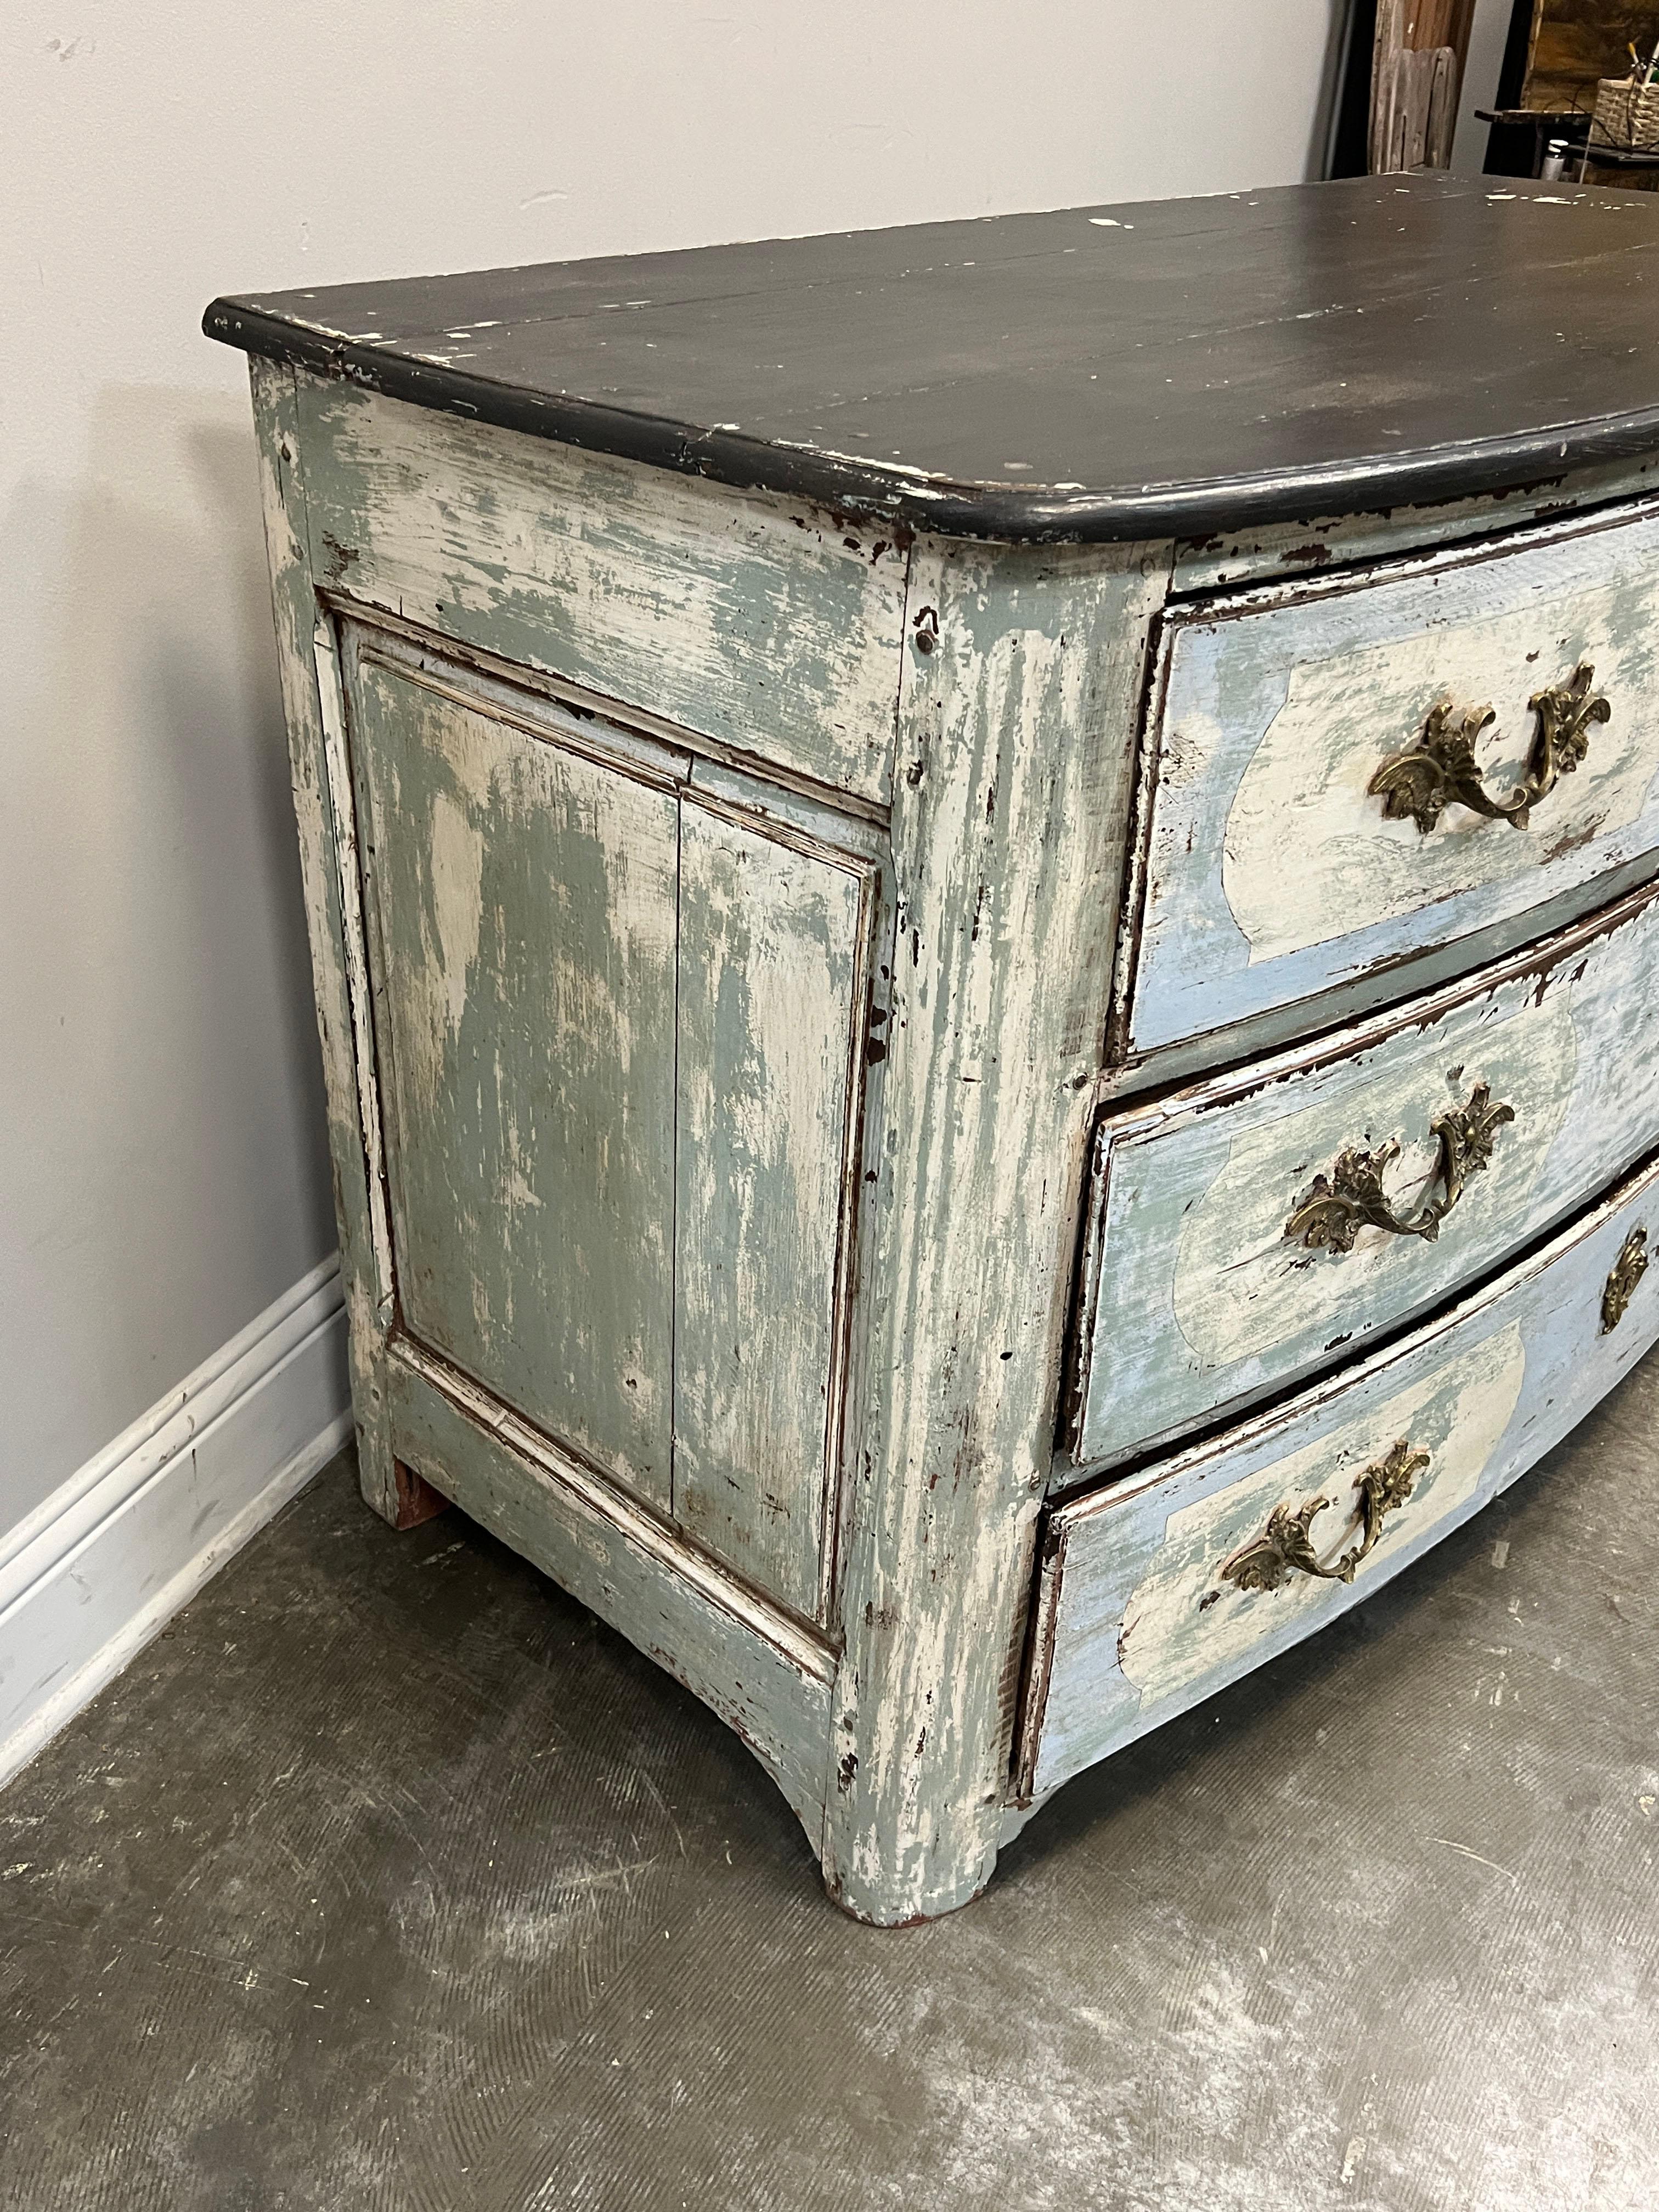 This is a beautiful French Provincial Louis XVI style painted bow front commode. The piece is hand crafted in the mid 18th century, France. 

Decorative painting appearing turquoise blue with cream or white accent was applied and executed to appear